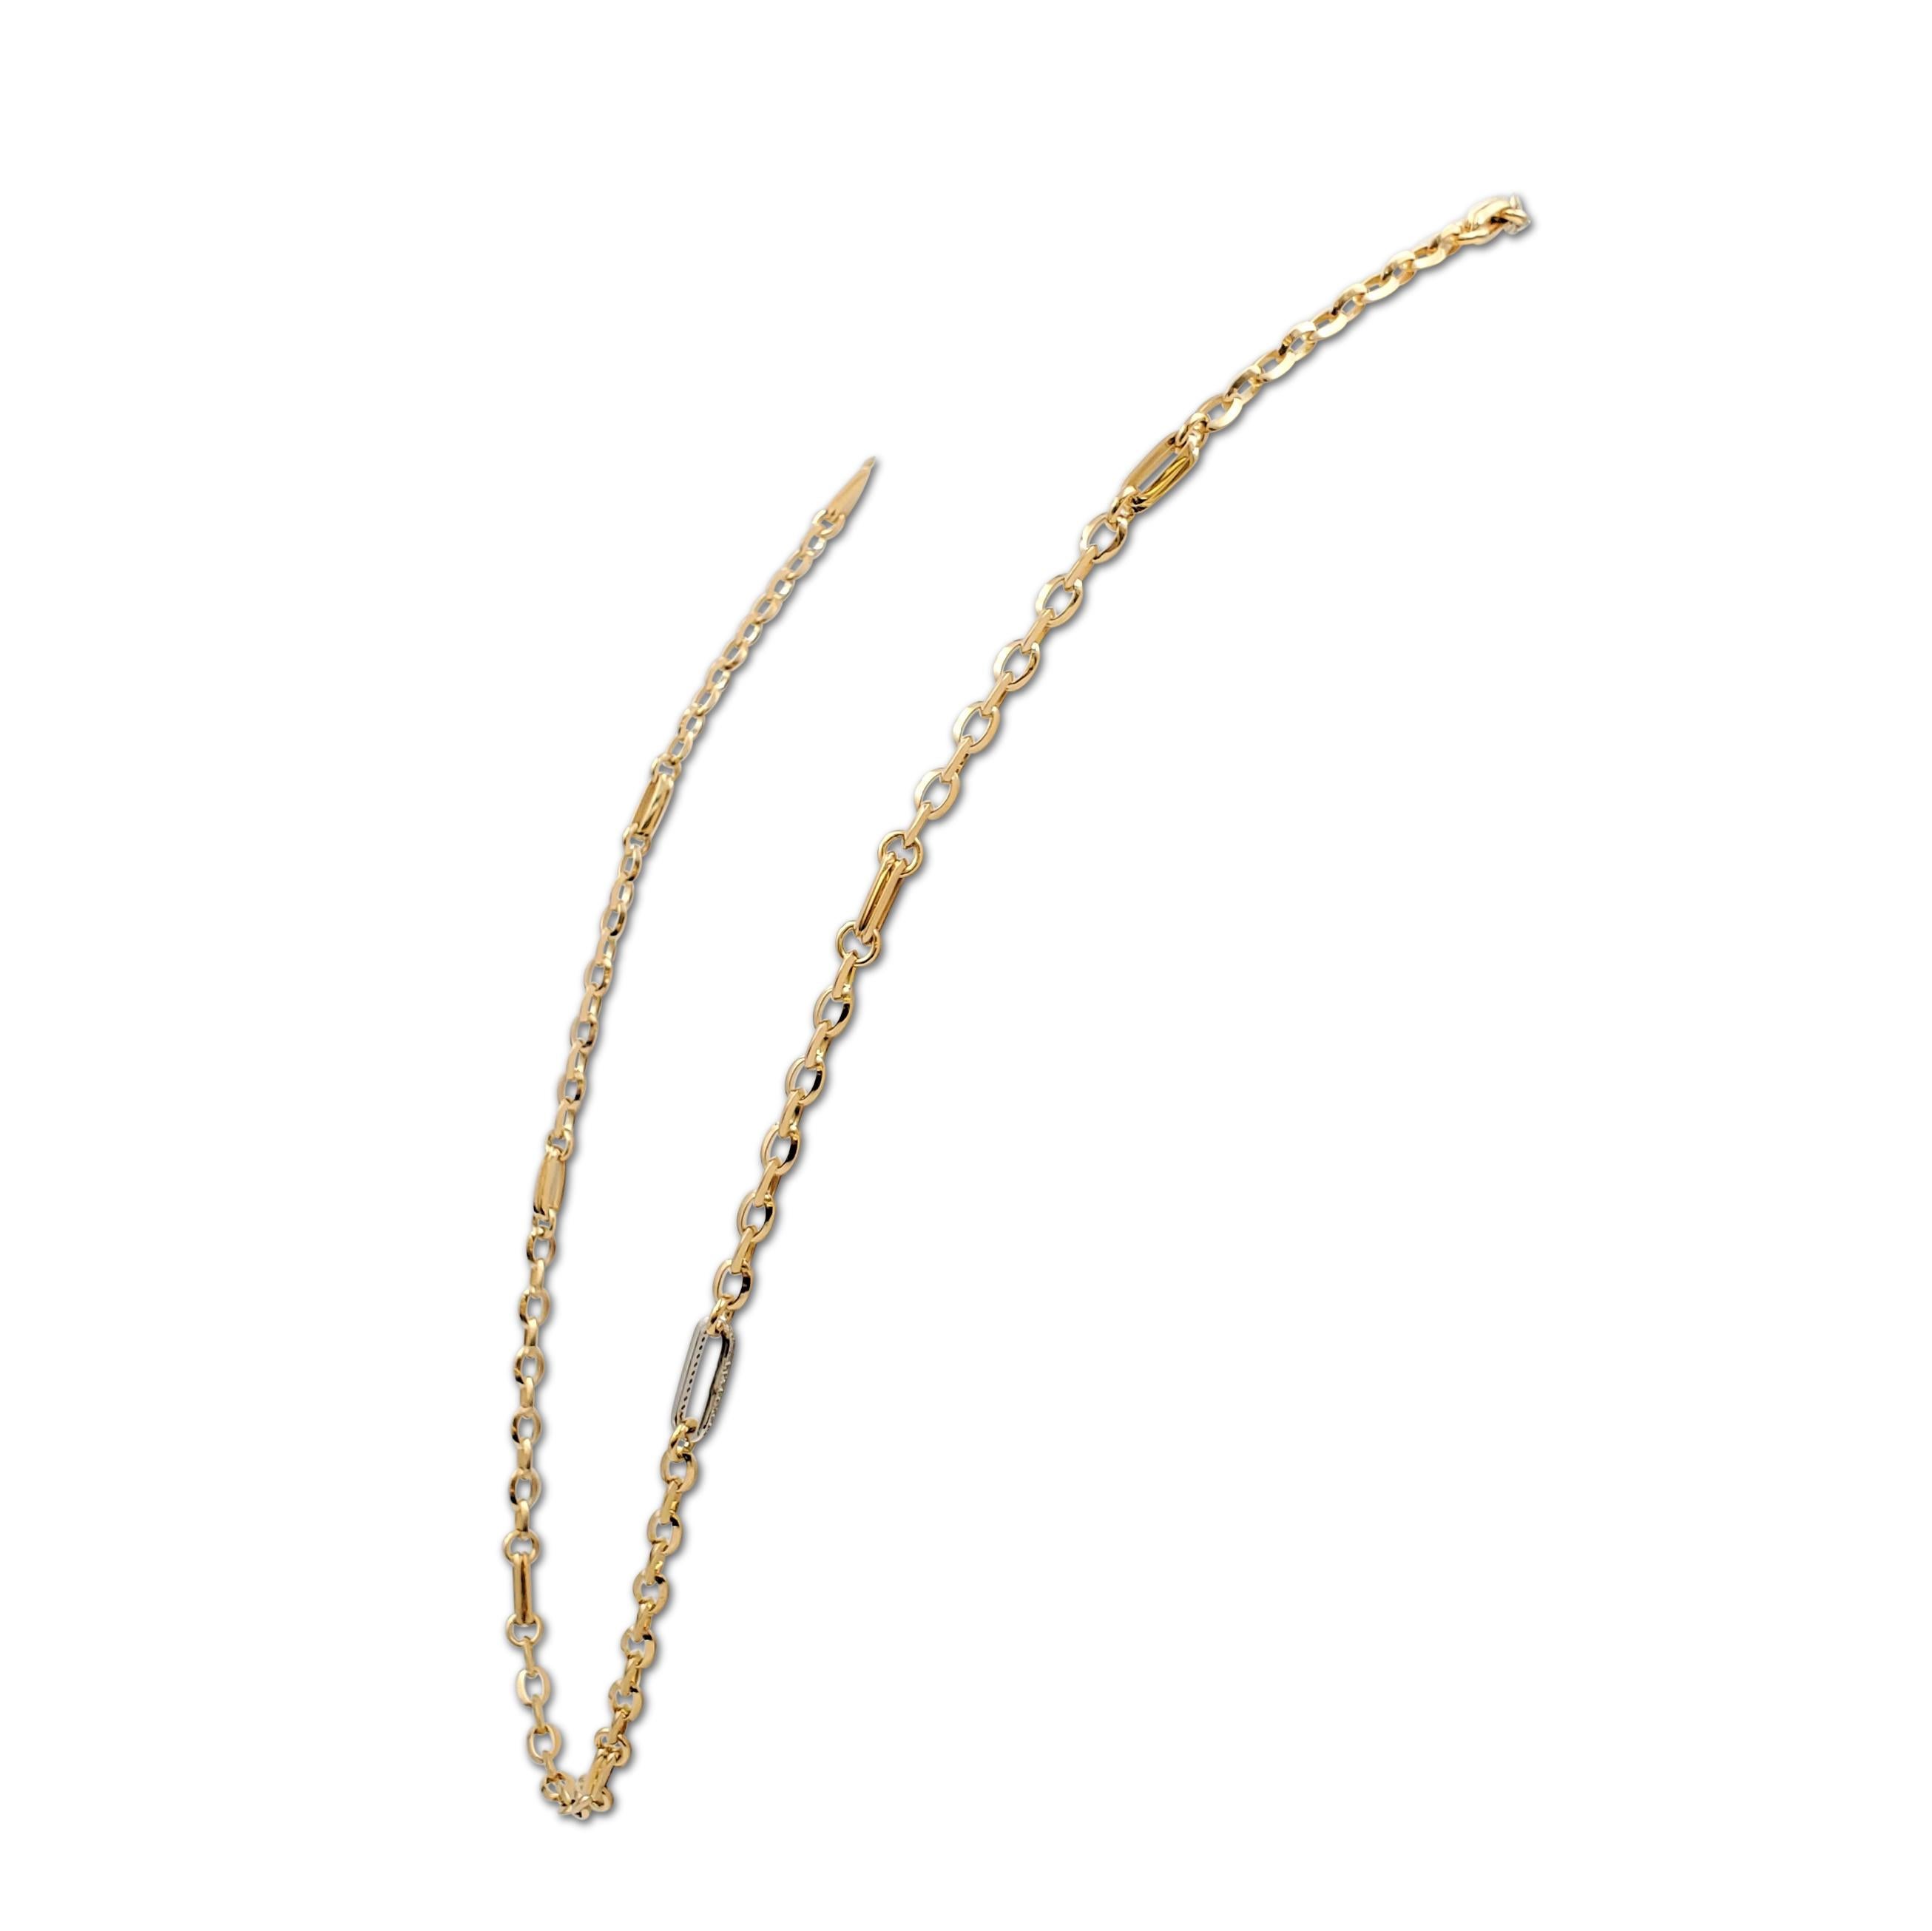 Authentic Roberto Coin necklace crafted in 18 karat gold is comprised of oval-shaped yellow gold links with a white gold pave diamond set accent. Signed with signature Roberto Coin ruby stone at the clasp. The necklace is presented with the original